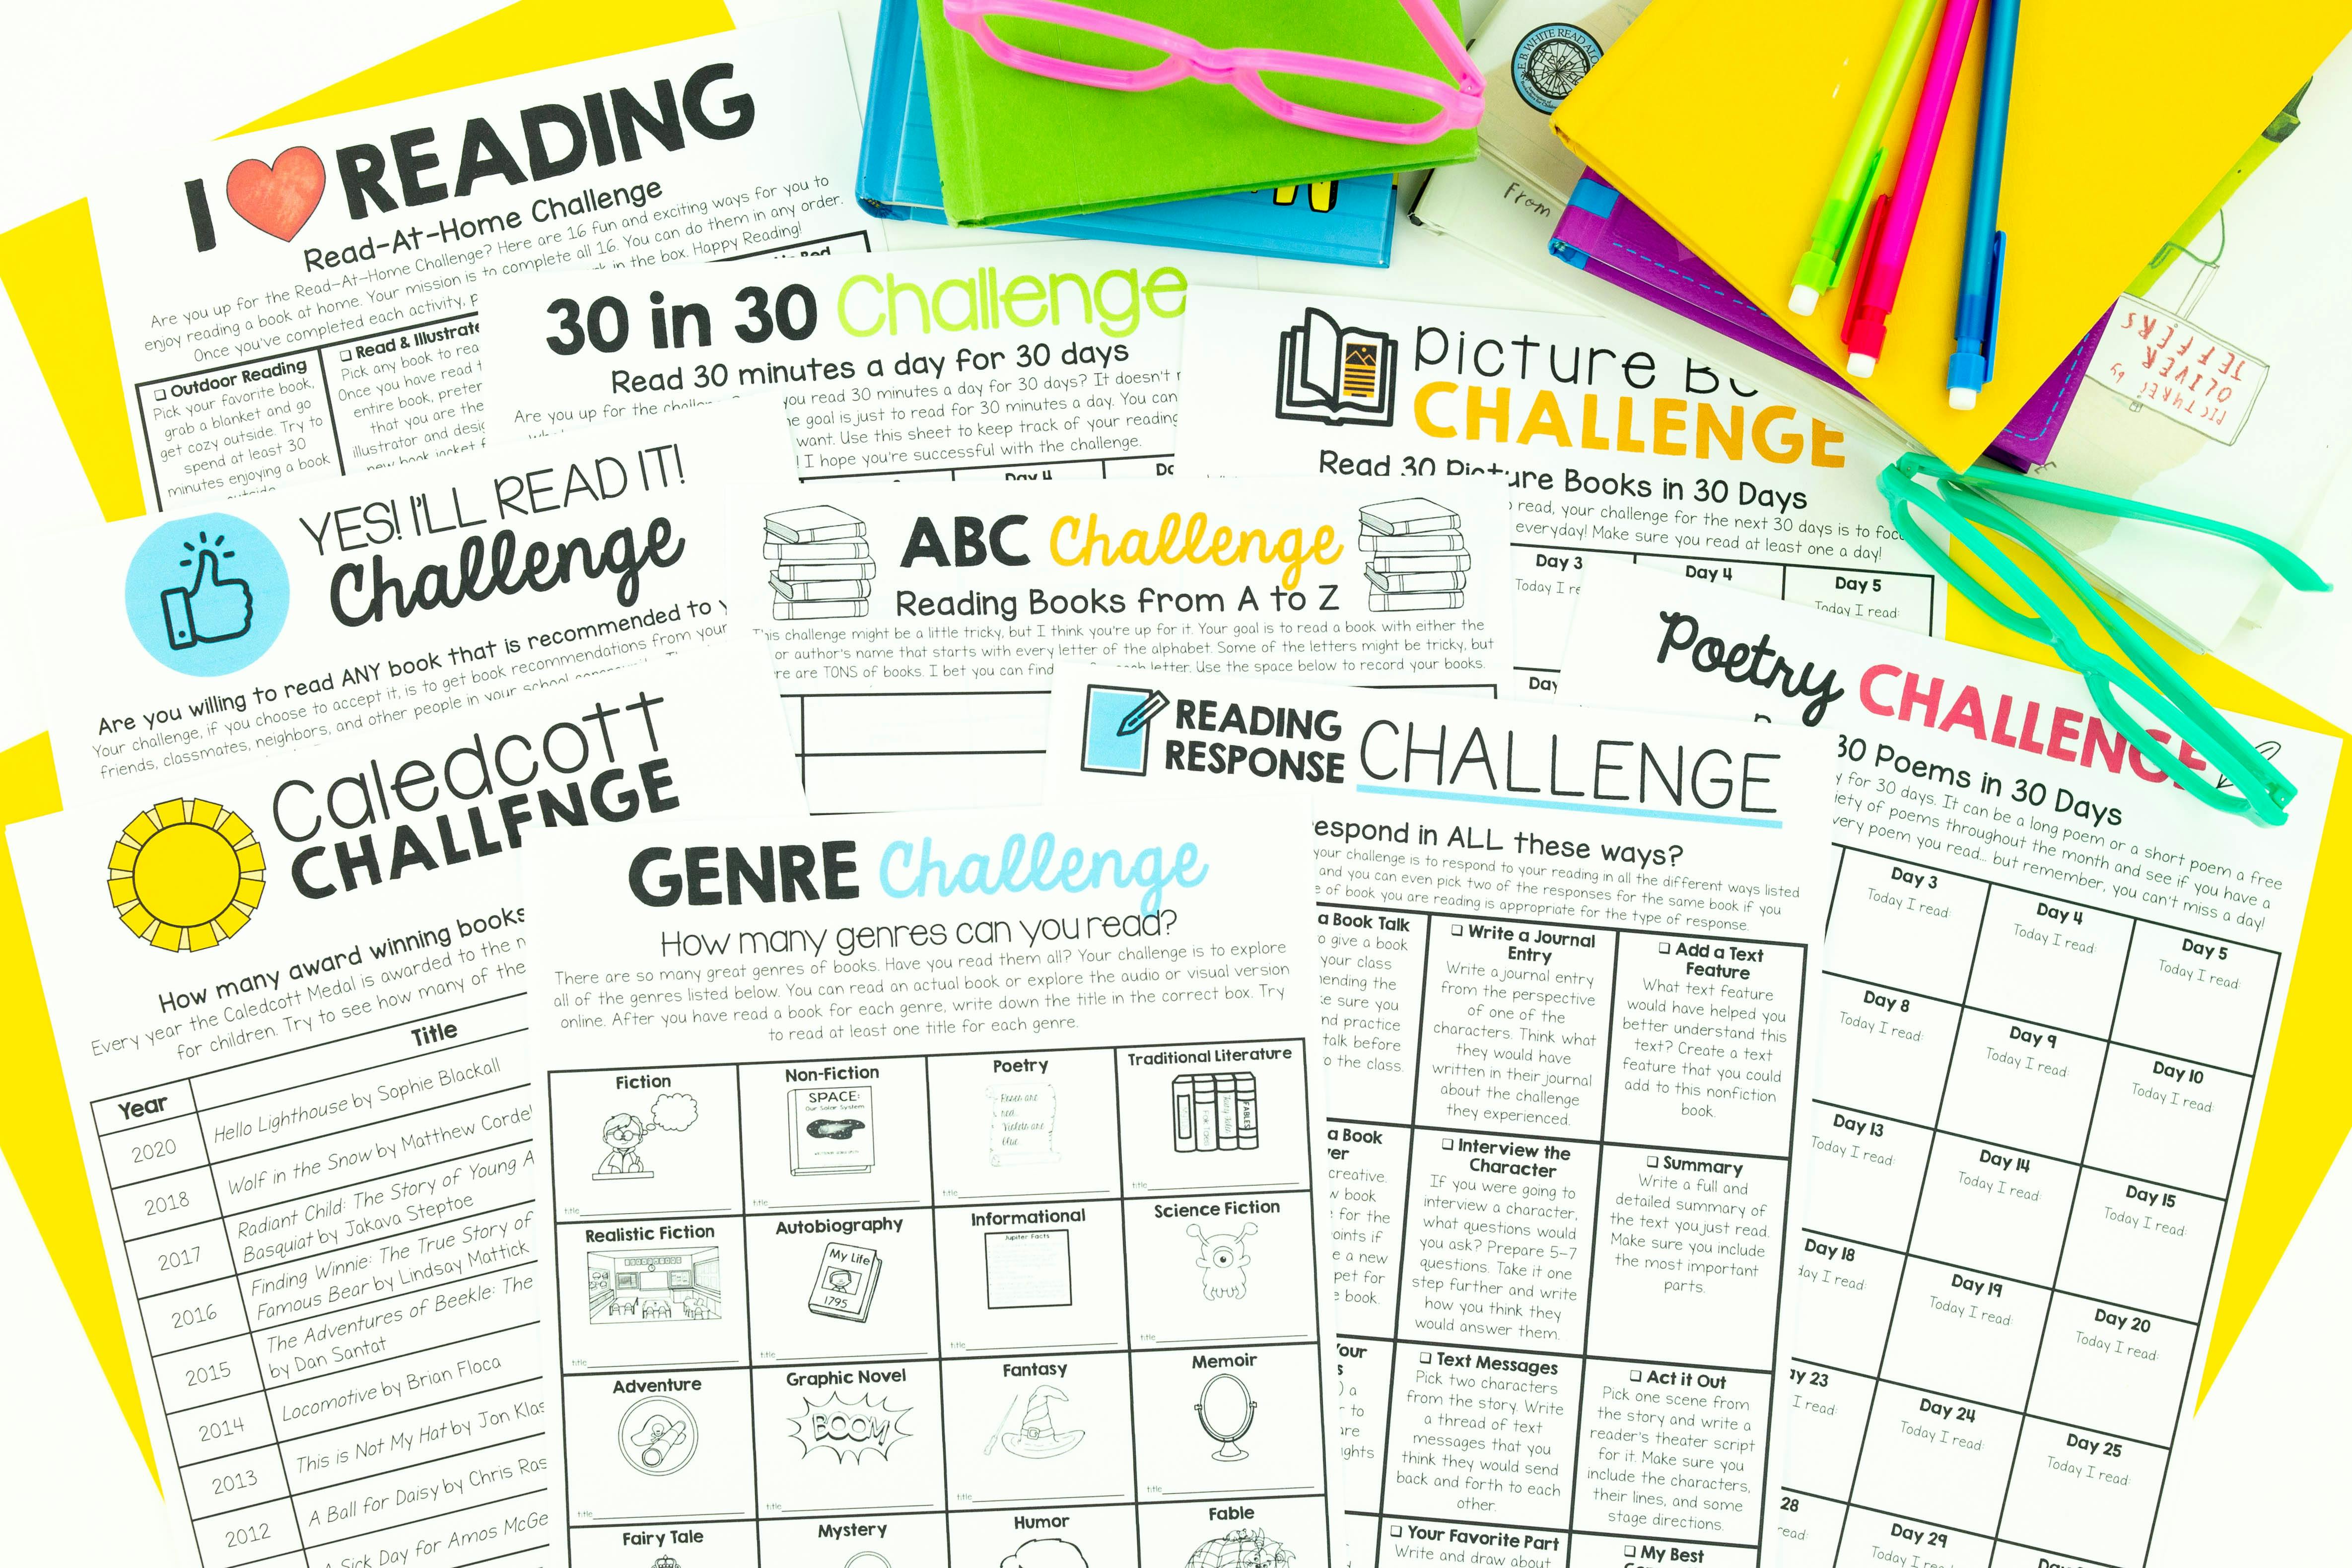 Pictures shows a variety of reading challenges like a genre challenge, poetry challenge, ABC challenge, and Caldecott Challenge as ideas for reading activities you can incorporate during the month of December. 
